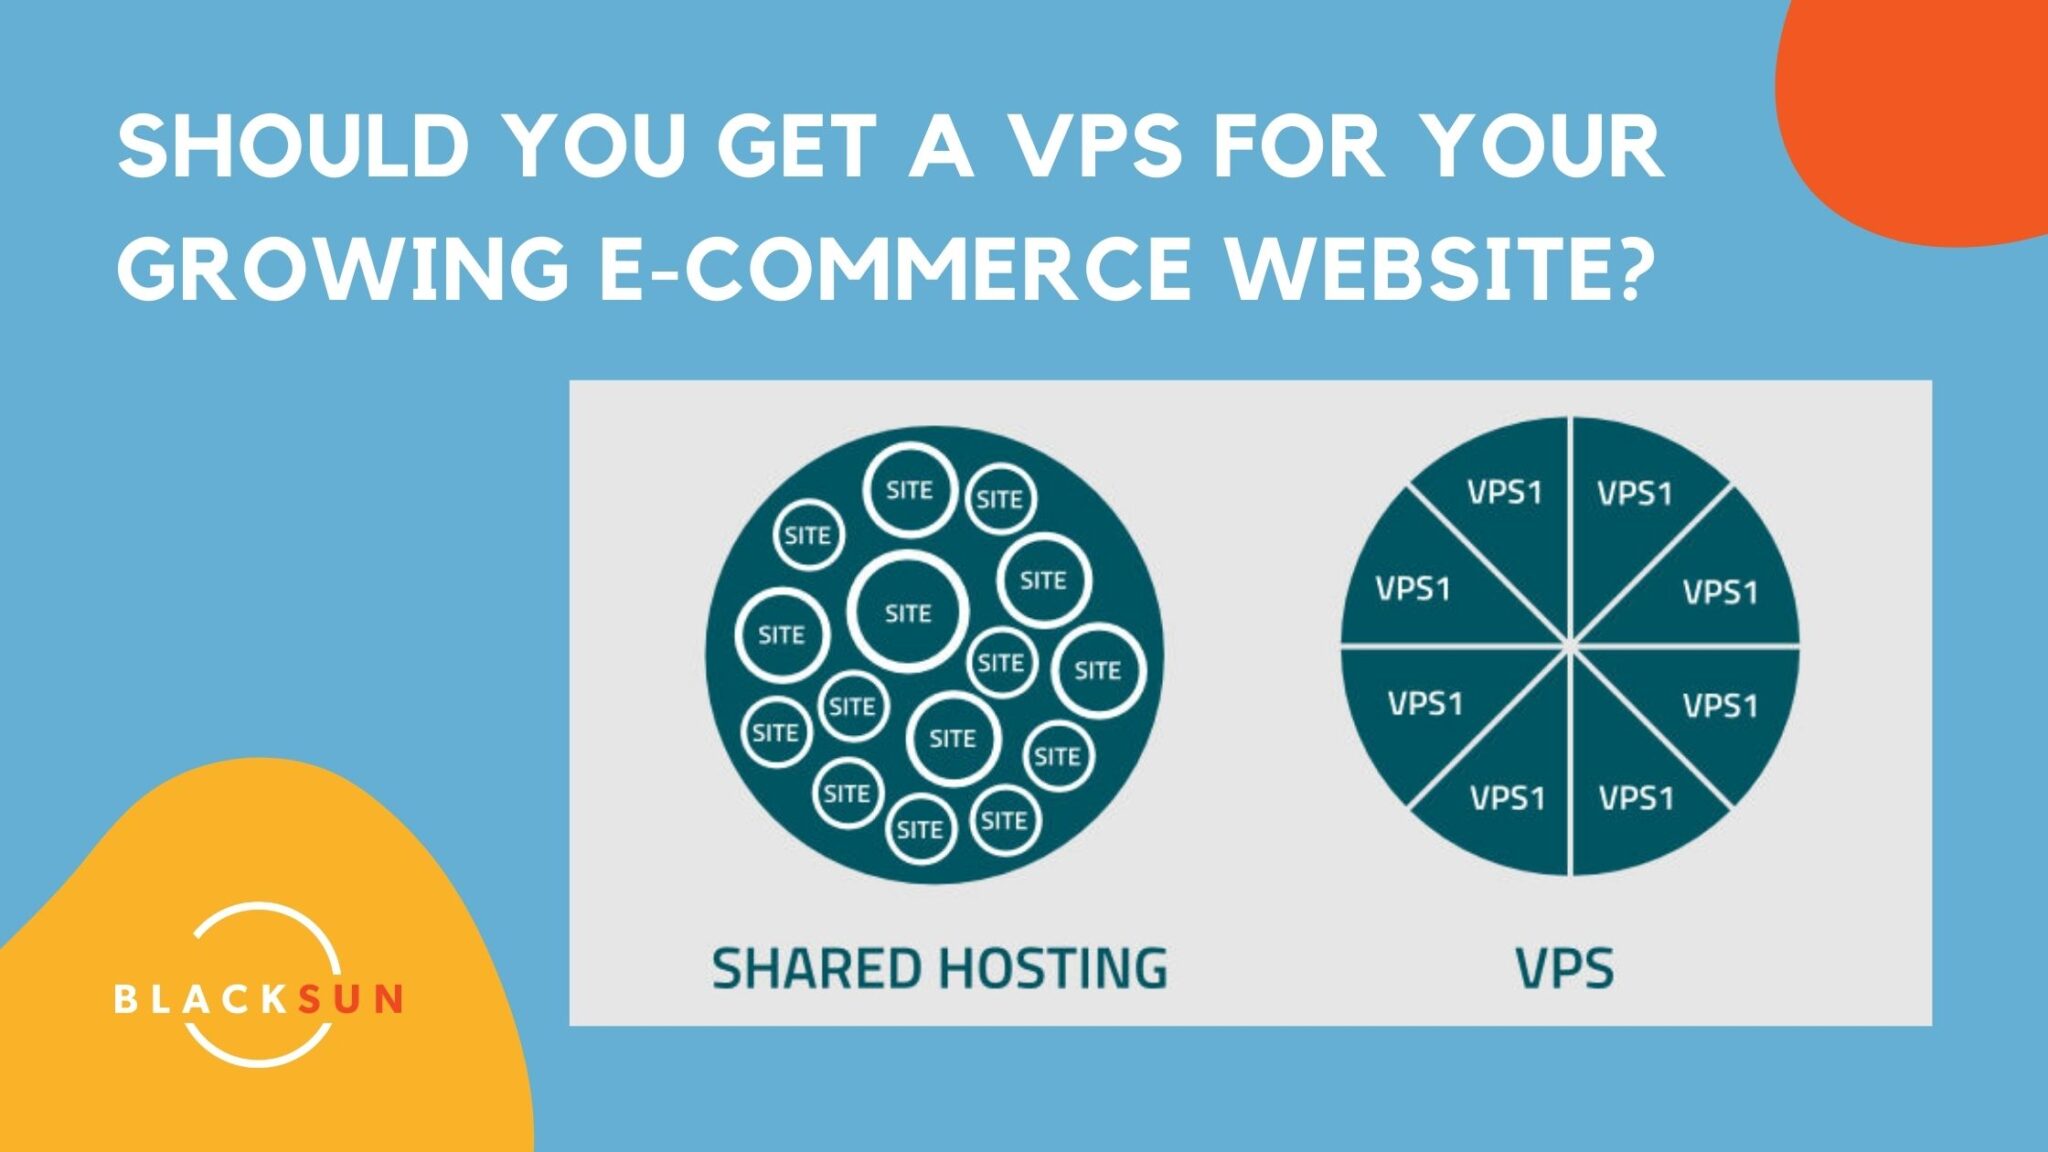 Should You Get A VPS For Your Growing E-Commerce Website?